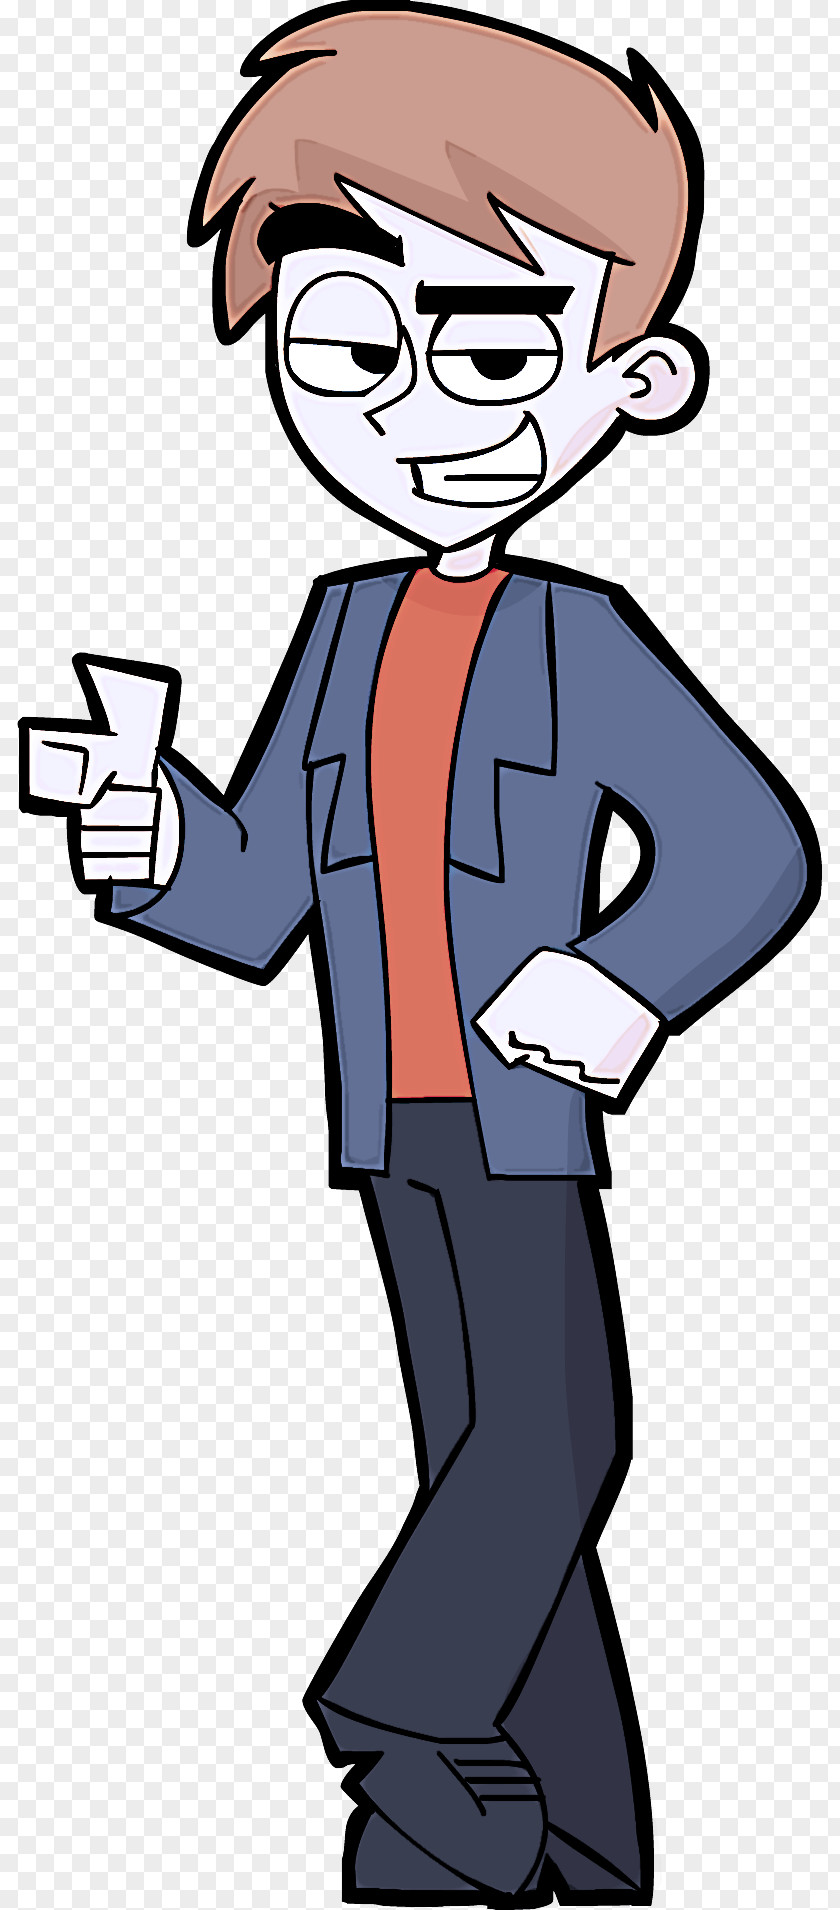 Businessperson Gesture Cartoon Finger Thumb Pleased PNG